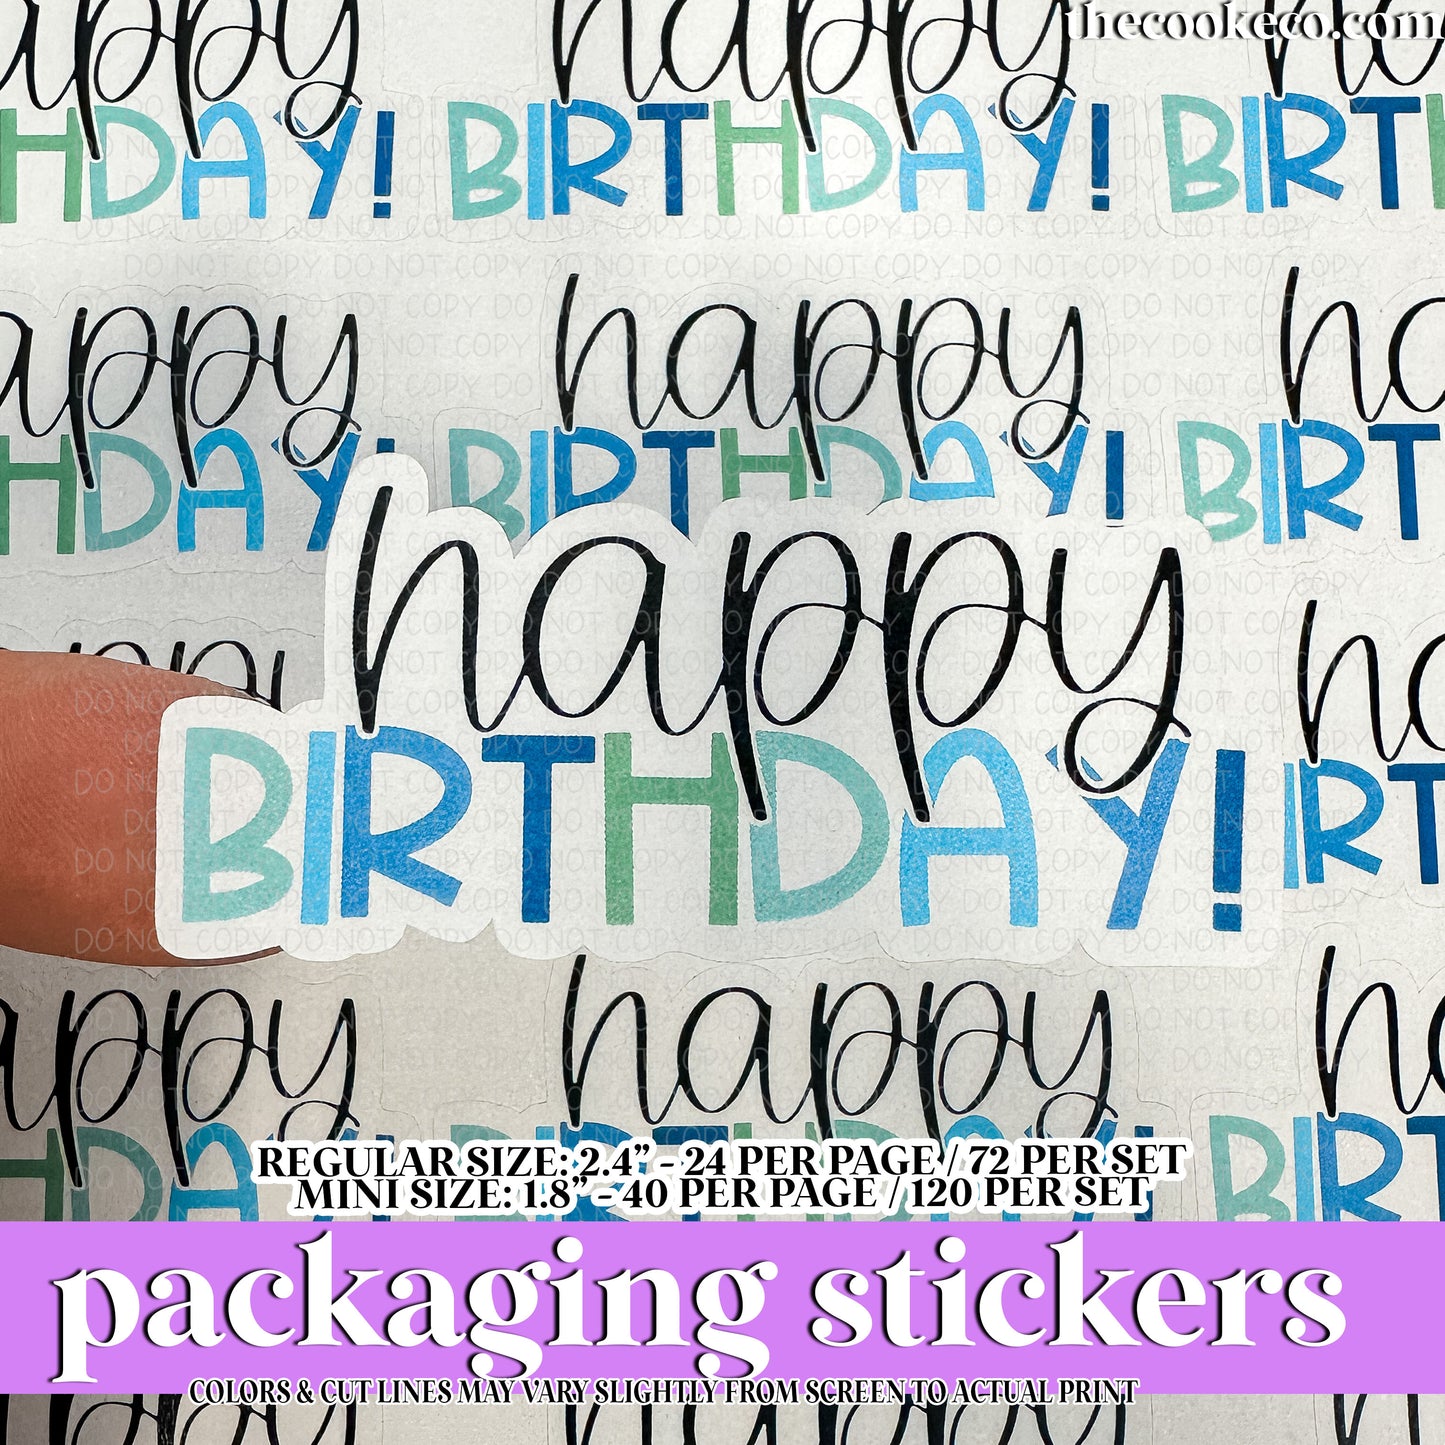 Packaging Stickers | #C0971 - HAPPY BIRTHDAY BLUES/GREENS